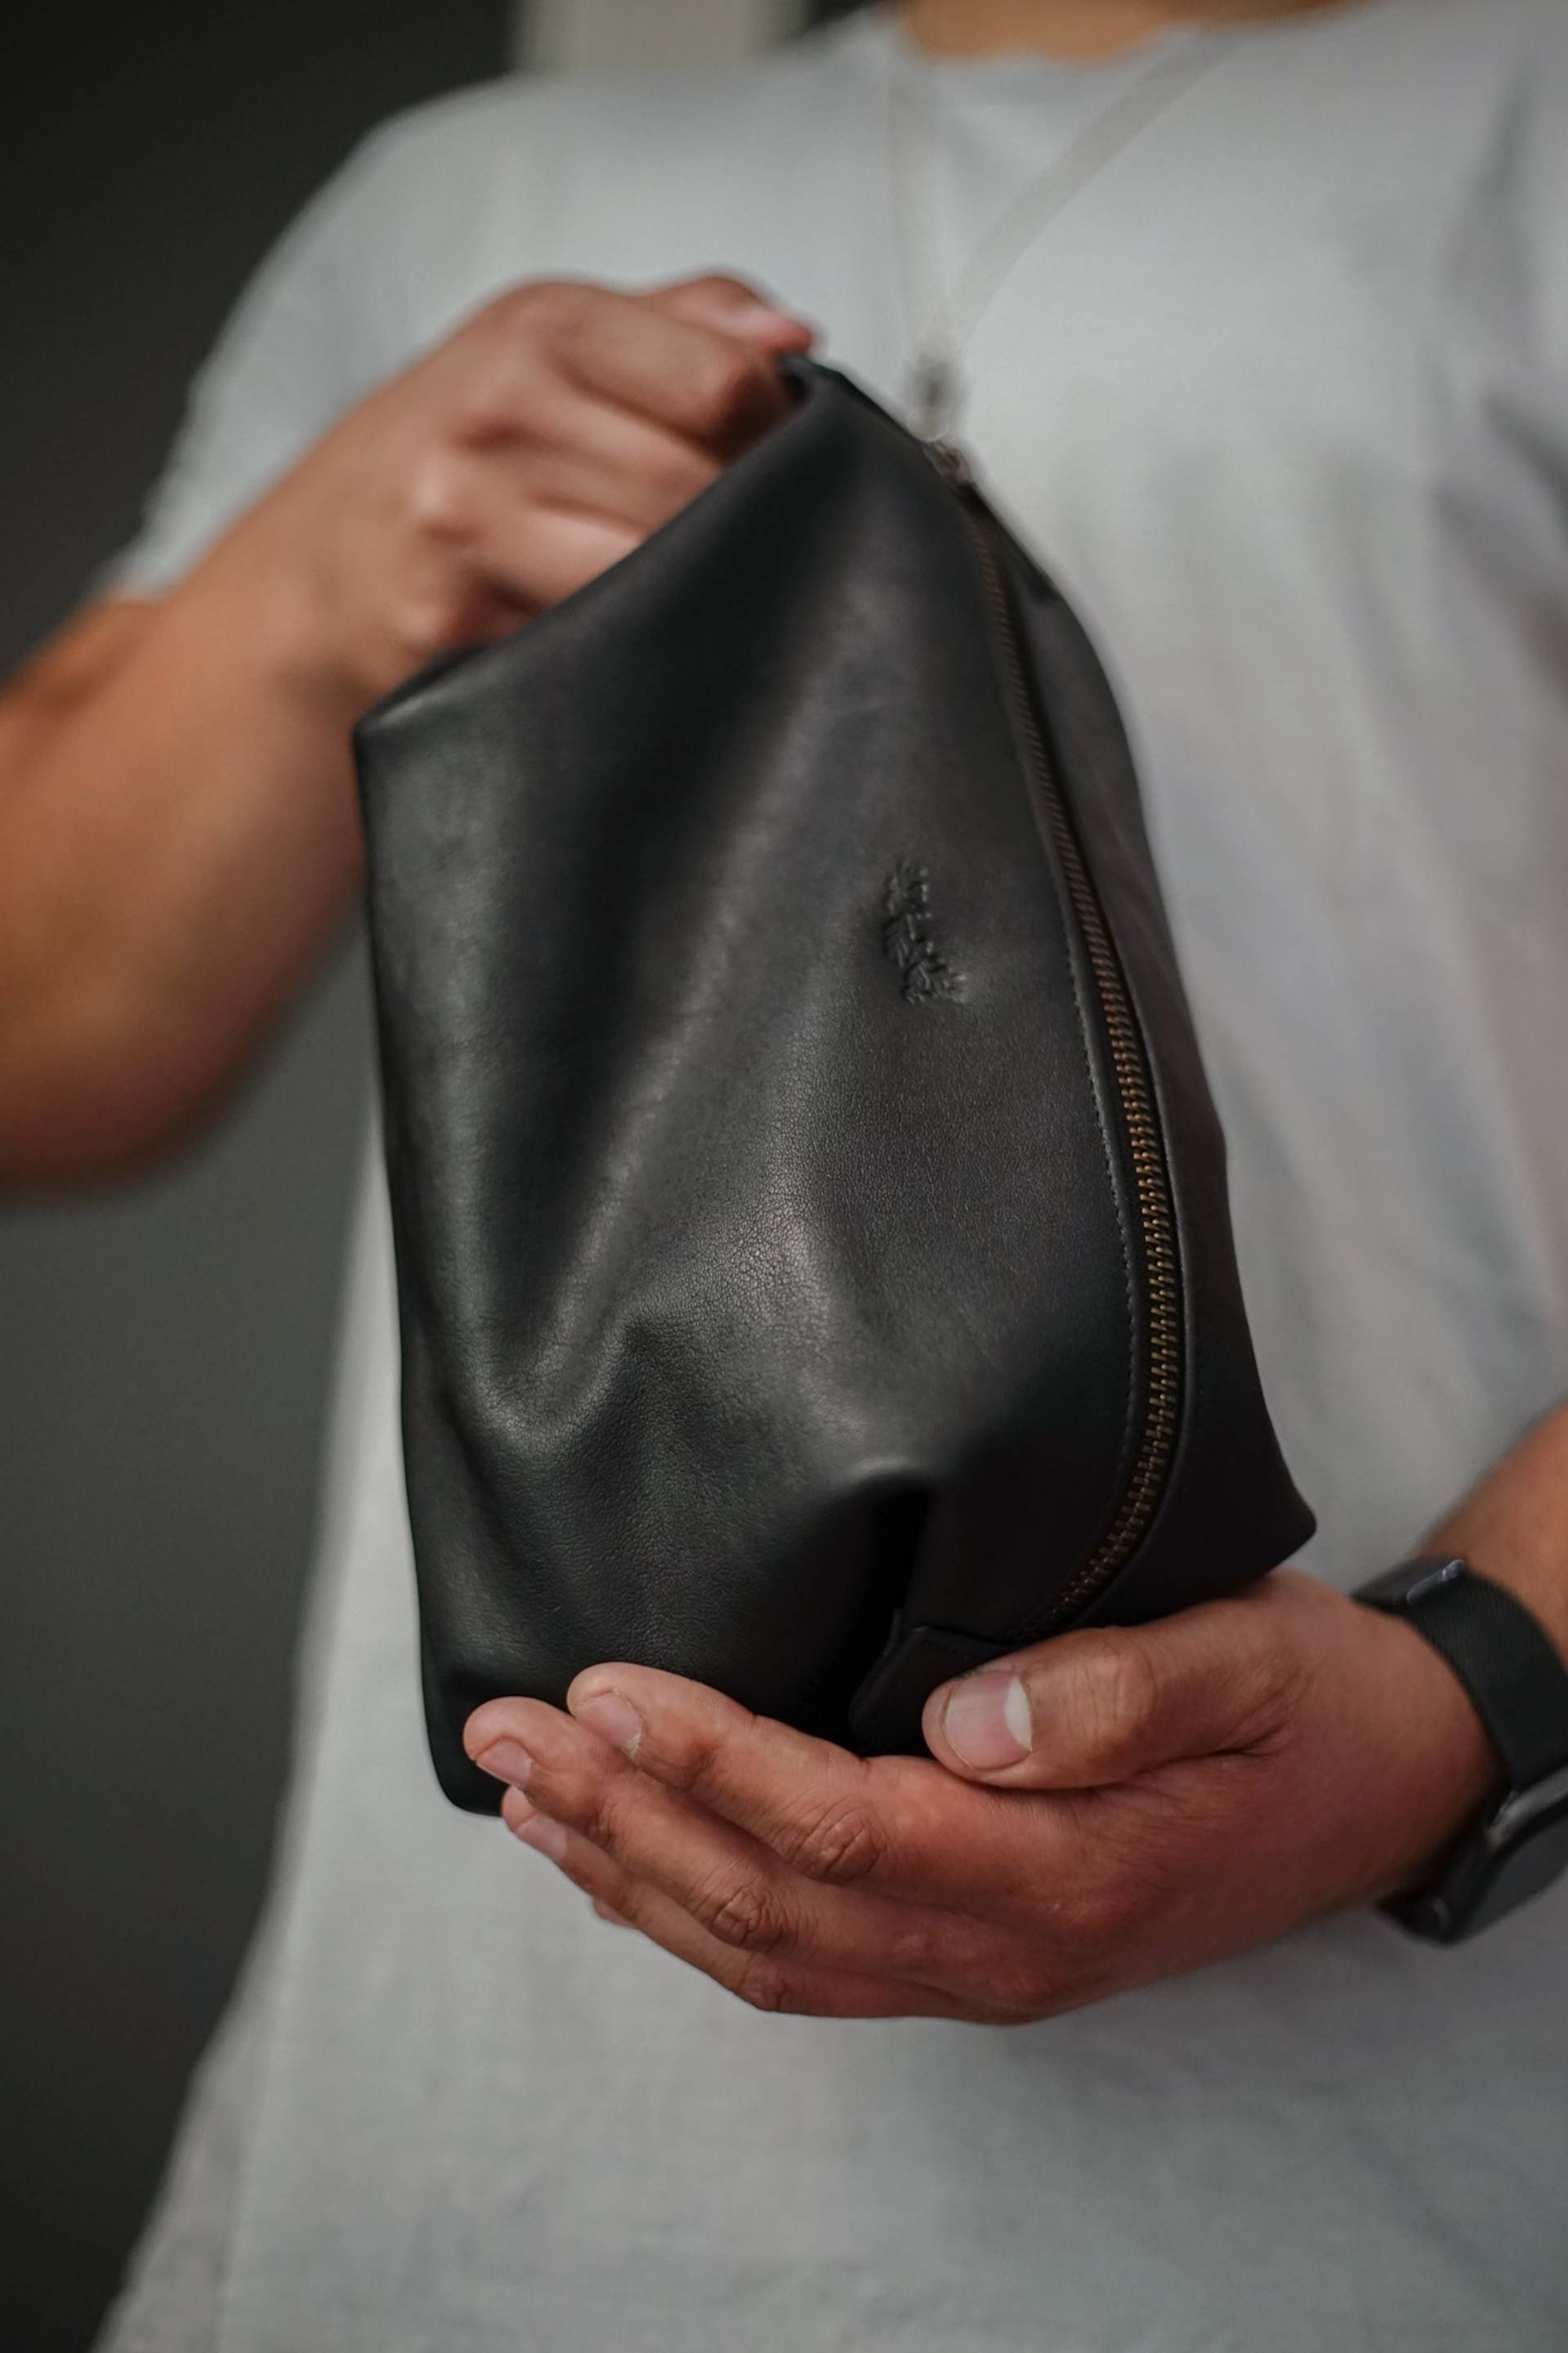 miles_louie_shapeless_pouch_doppkit_leather_light_travel_vacation_organization_carryall_cosmetics_bag_03.jpg